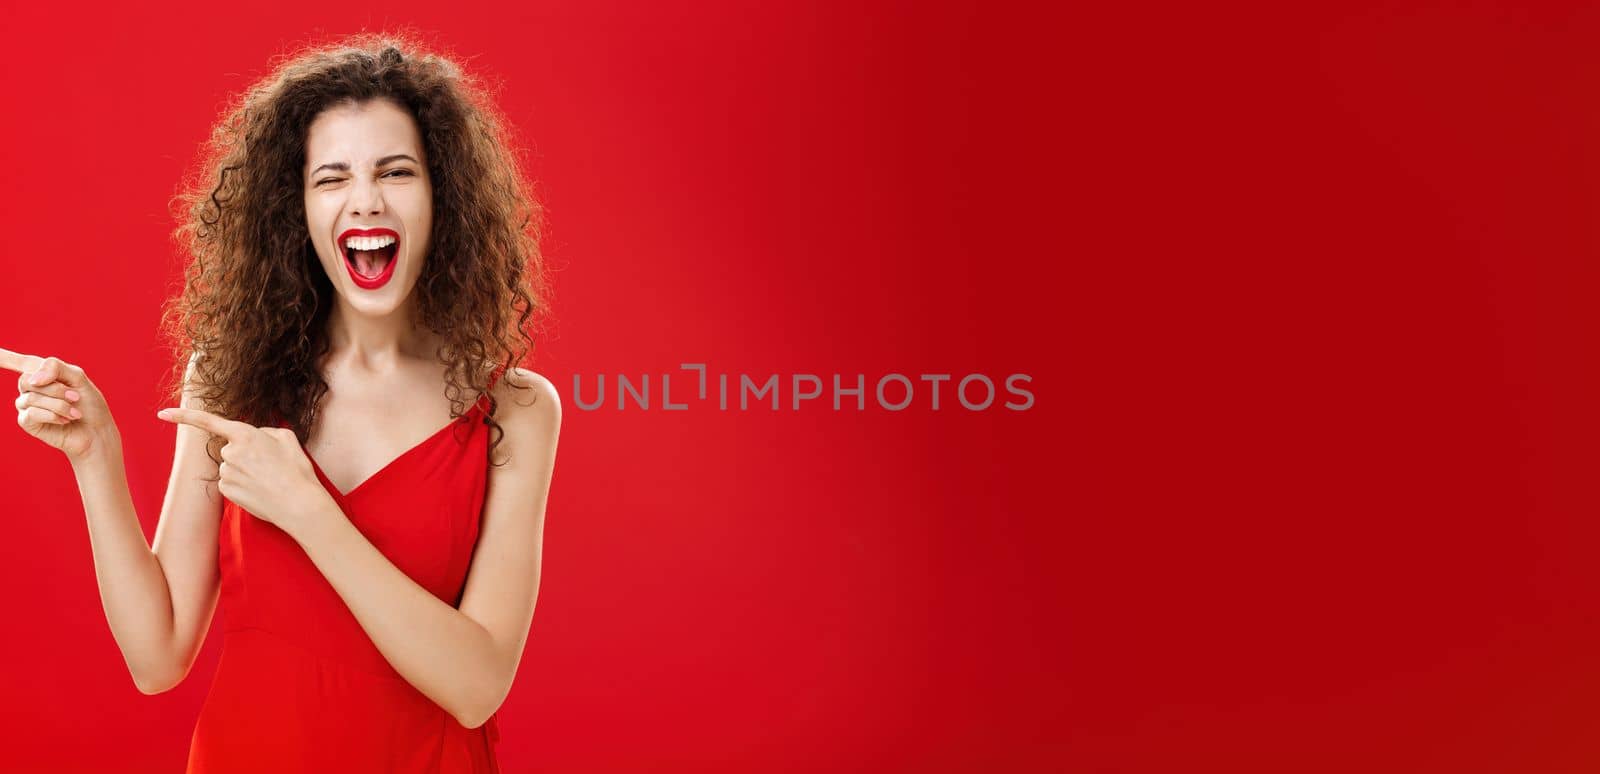 Woman feeling awesome on great party of friend pointing at entrance. Stylish carefree curly-haired female in red evening dress having fun near pool winking smiling joyfully and pointing left.